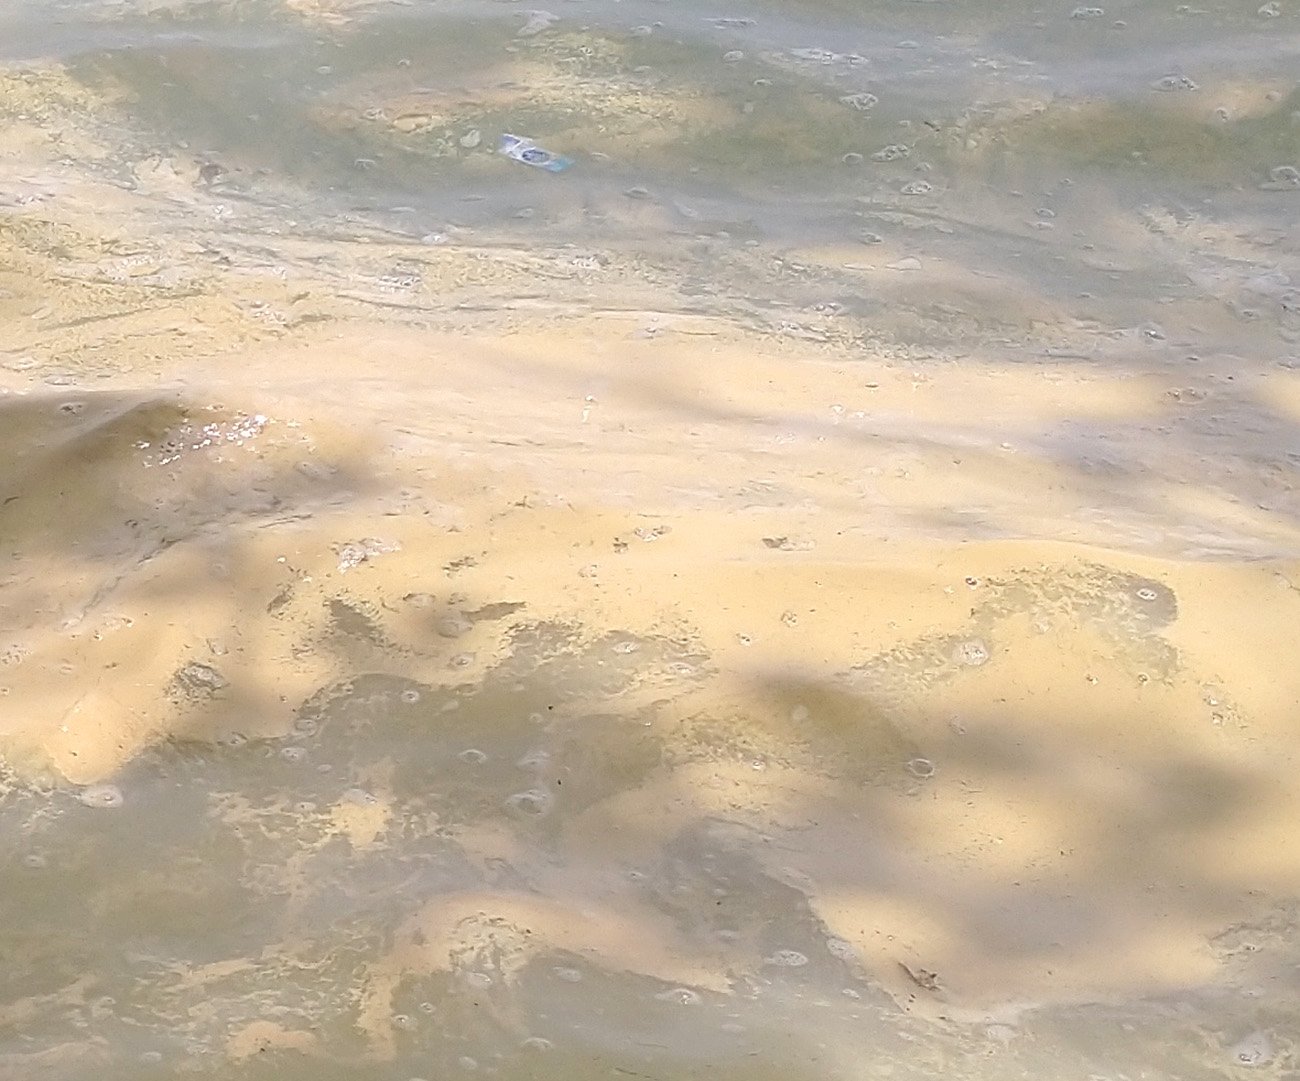 The water had this long streak of yellowish goop which I assume is tons of pollen that fell in the water.